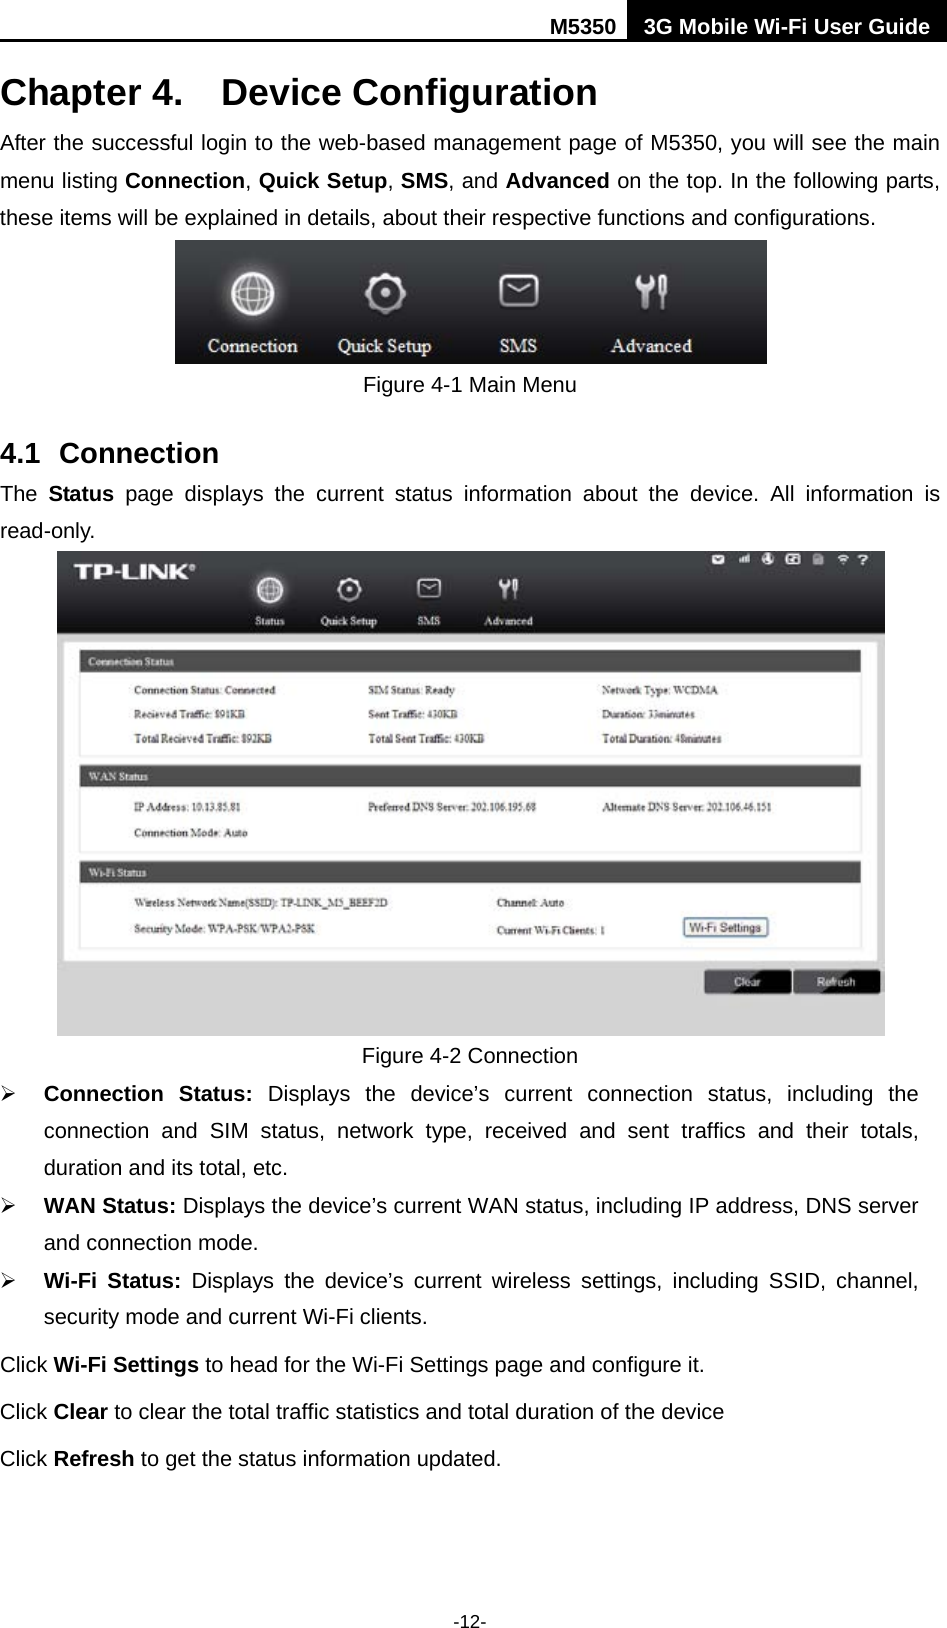 M5350 3G Mobile Wi-Fi User Guide  -12- Chapter 4. Device Configuration After the successful login to the web-based management page of M5350, you will see the main menu listing Connection, Quick Setup, SMS, and Advanced on the top. In the following parts, these items will be explained in details, about their respective functions and configurations.  Figure 4-1 Main Menu 4.1 Connection The  Status page  displays the current status information about the device. All information is read-only.    Figure 4-2 Connection  Connection  Status:  Displays the device’s current connection status, including the connection and SIM status, network type, received and sent traffics and their totals, duration and its total, etc.  WAN Status: Displays the device’s current WAN status, including IP address, DNS server and connection mode.    Wi-Fi Status:  Displays the device’s current wireless settings, including SSID, channel, security mode and current Wi-Fi clients.   Click Wi-Fi Settings to head for the Wi-Fi Settings page and configure it. Click Clear to clear the total traffic statistics and total duration of the device Click Refresh to get the status information updated. 